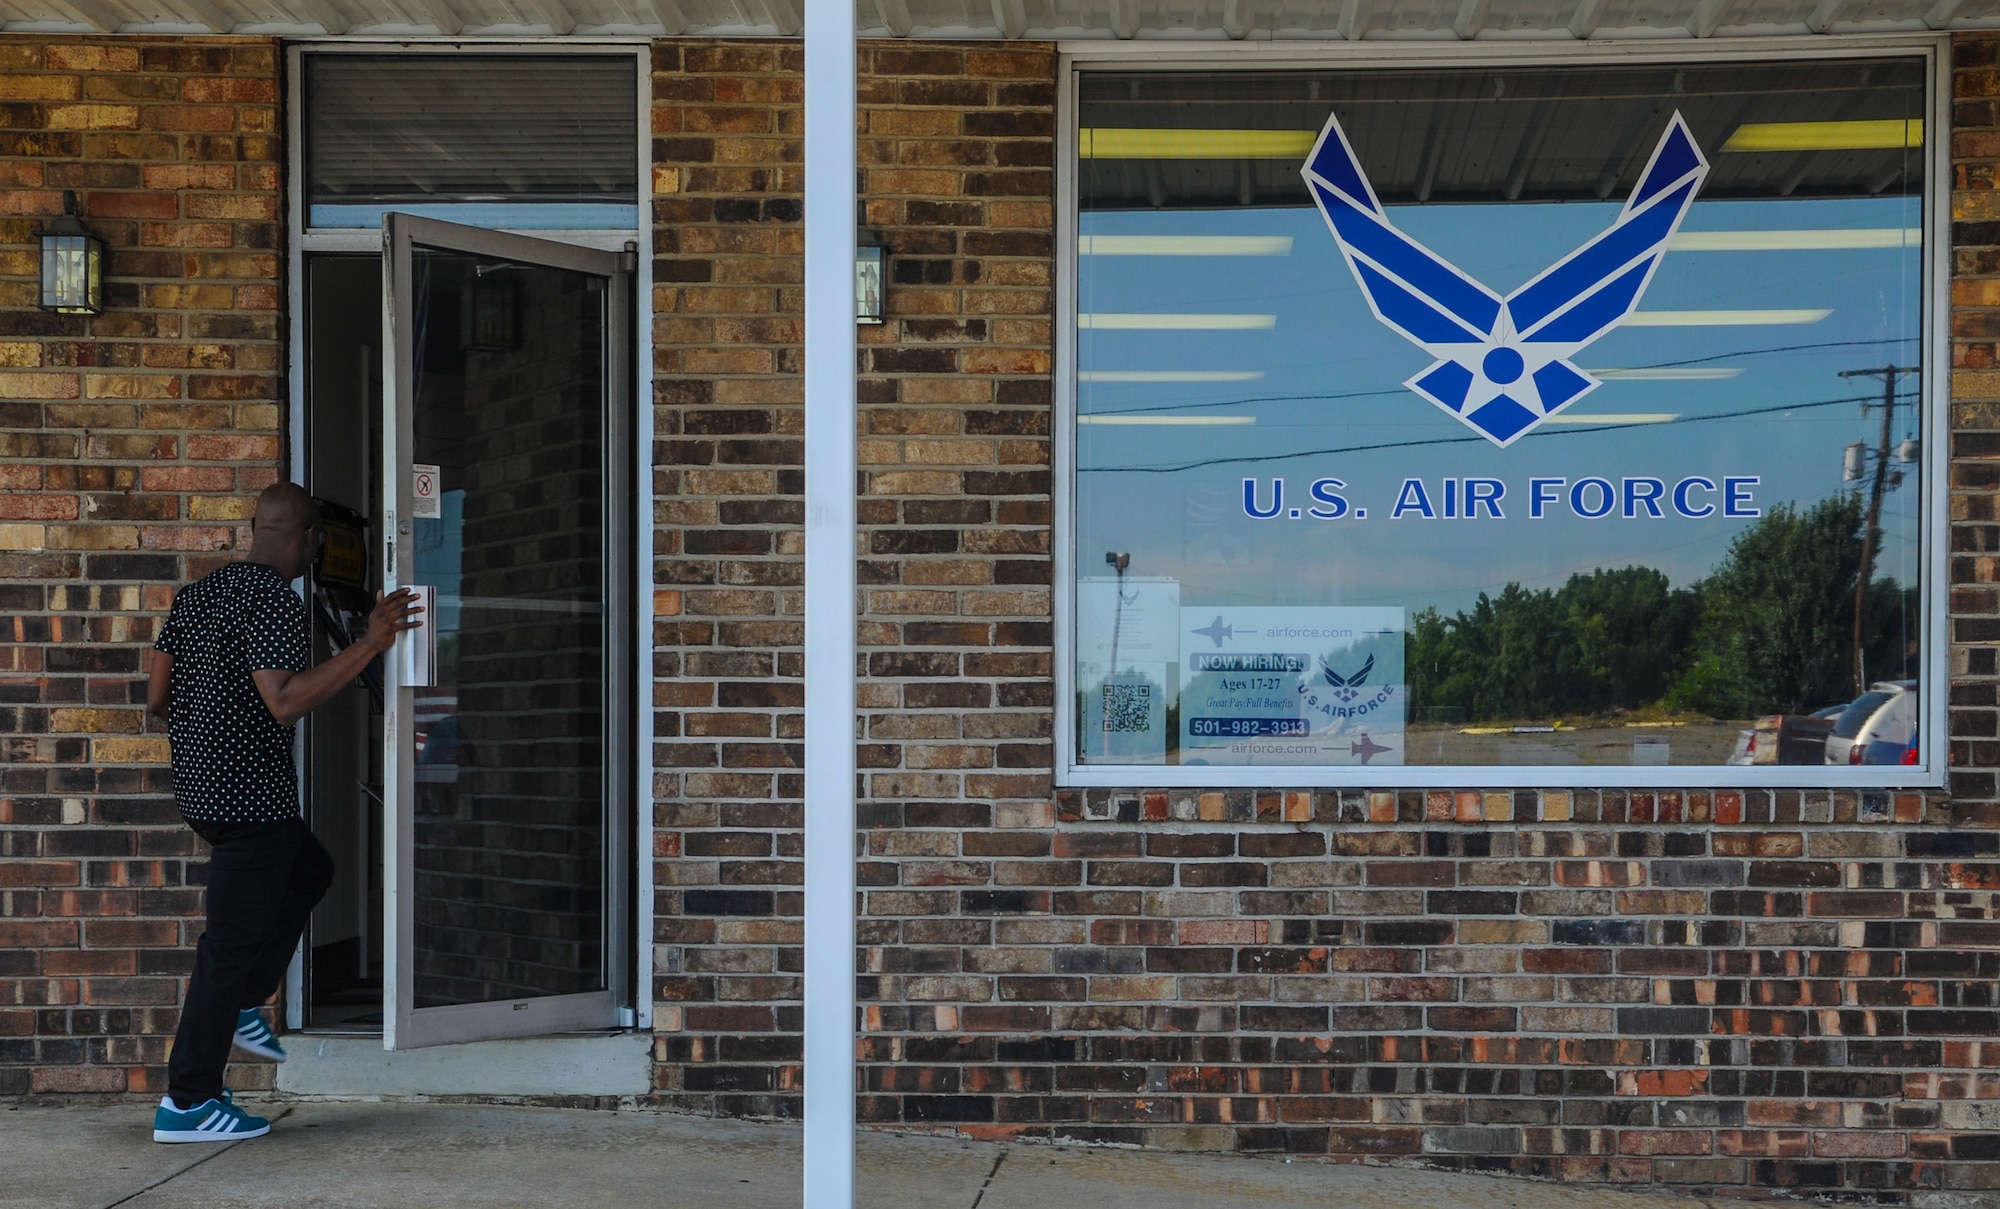 Billy Scott Jr. walks into an Air Force recruiting office to discuss his departure for basic training and his possible career options July 15, 2014, in Jacksonville, Ark. An Air Force recruiter’s office is the first stop for all enlisted Airmen. (U.S. Air Force photo by Airman 1st Class Harry Brexel) 